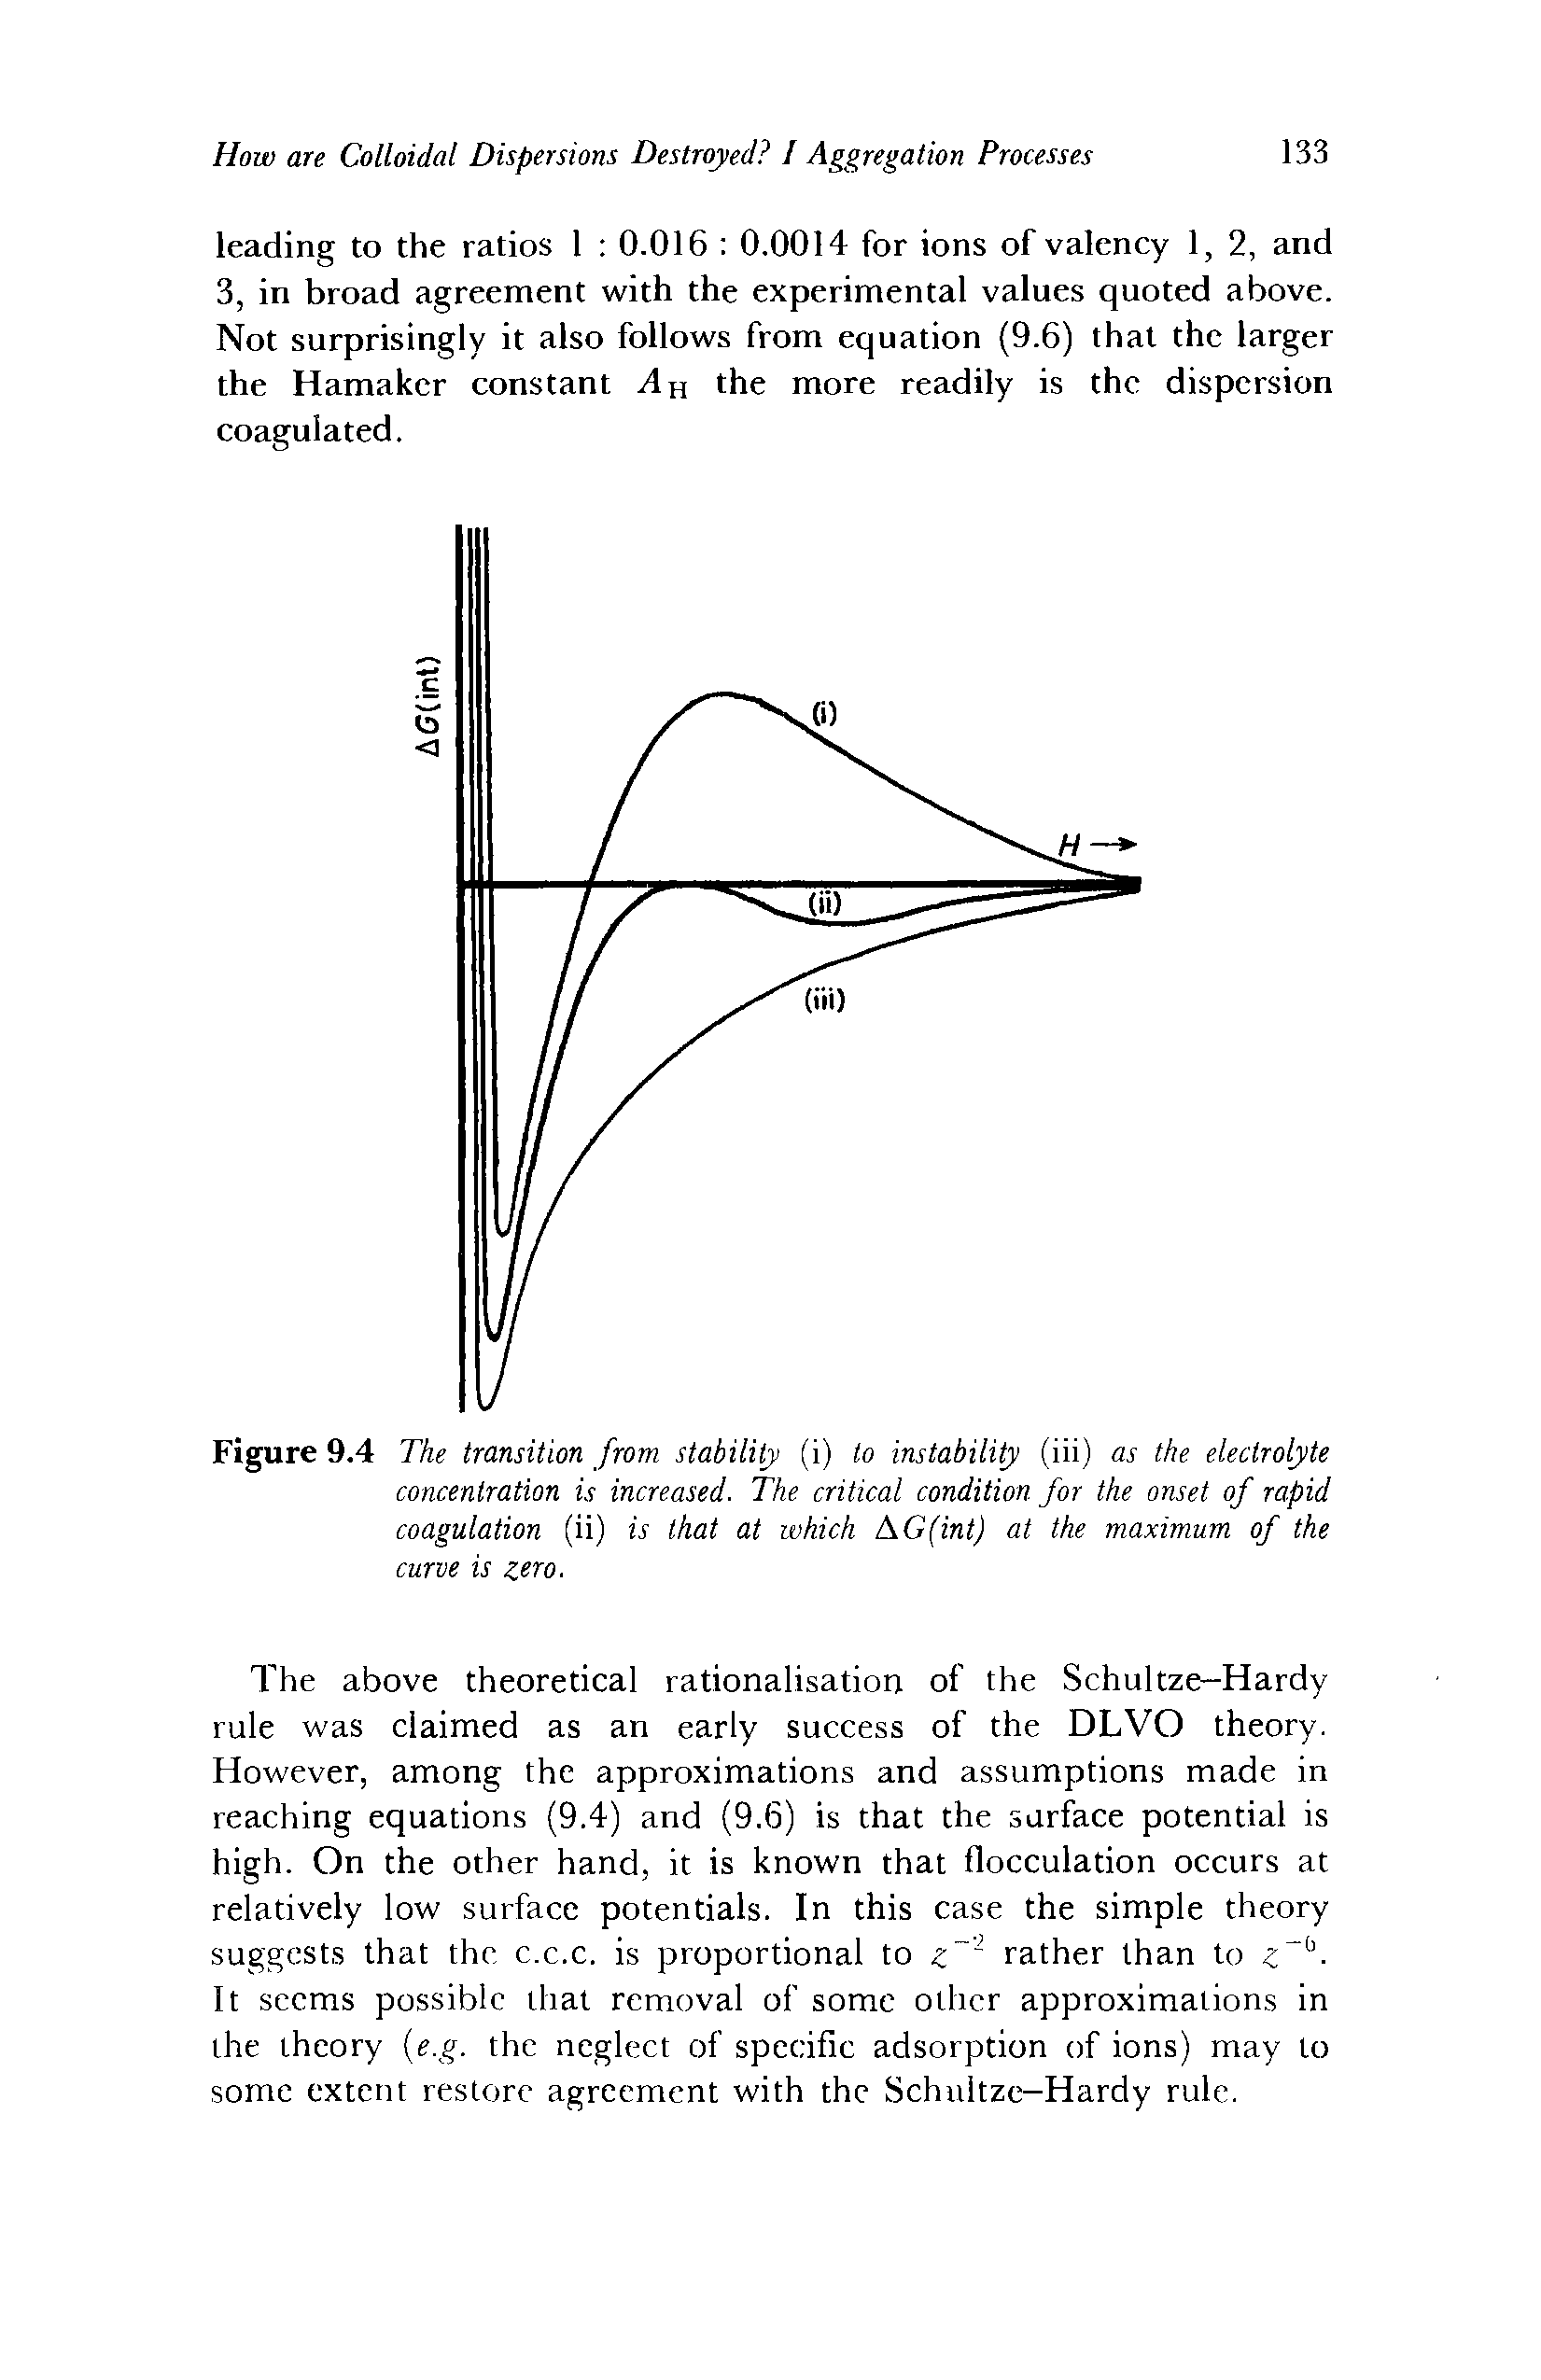 Figure 9.4 The transition from stability (i) to instability (iii) as the electrolyte concentration is increased. The critical condition for the onset of rapid coagulation (ii) is that at which AG(int) at the maximum of the curve is zero.